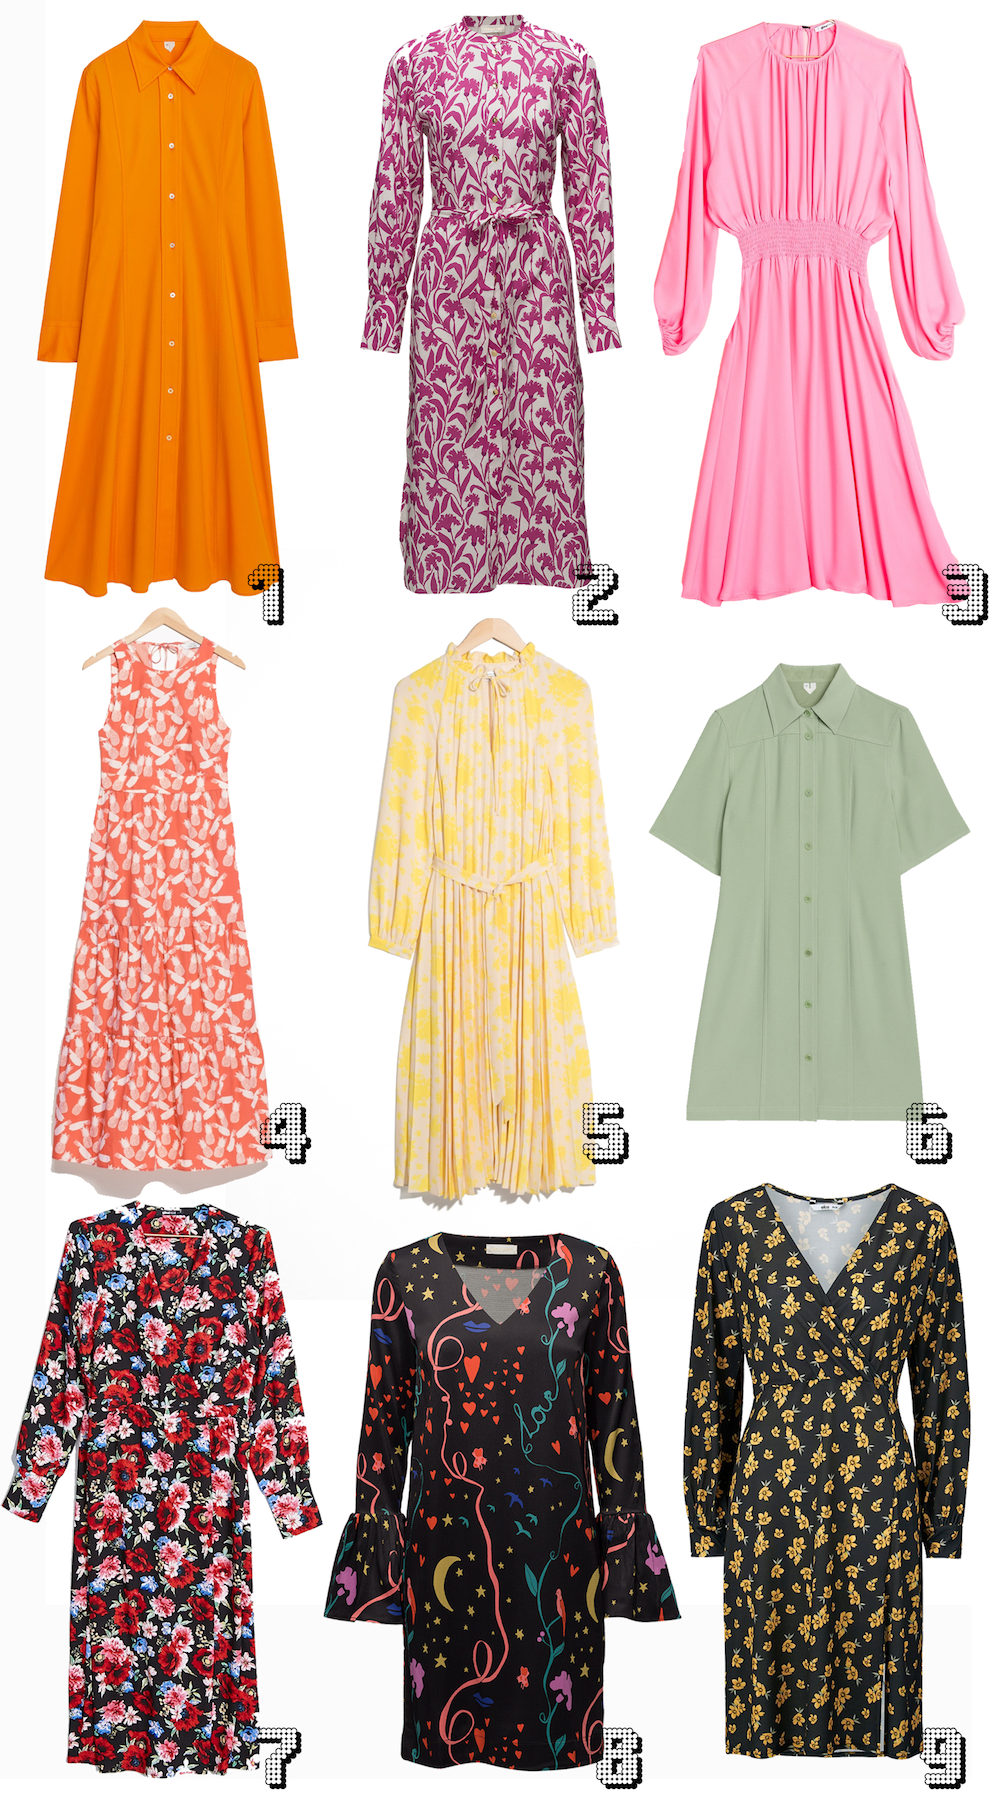 9 spring dresses I’d wear right now